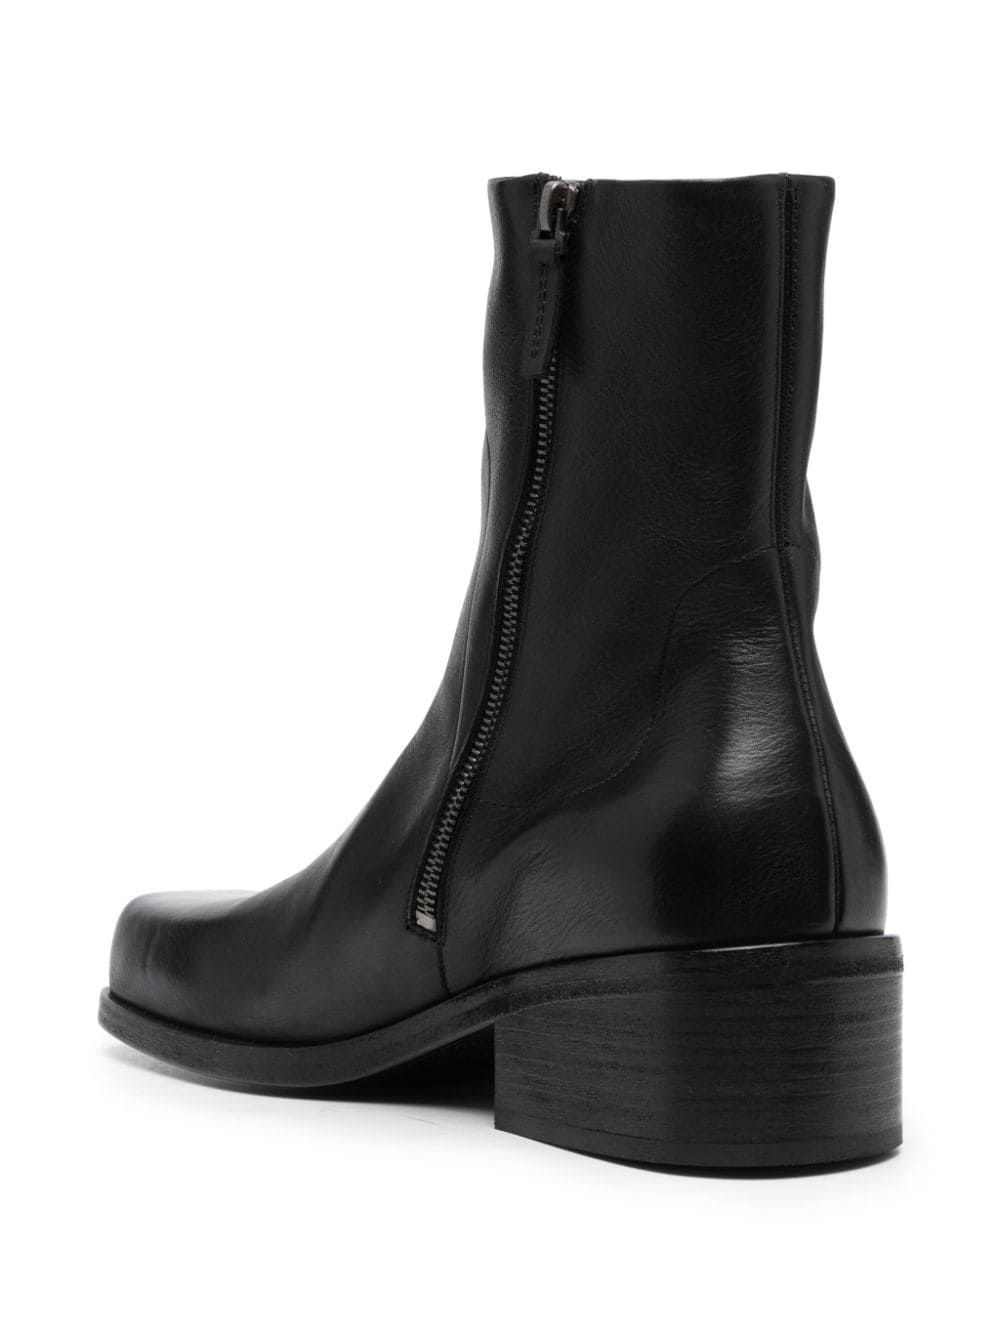 Cassello 70mm leather boots - 3